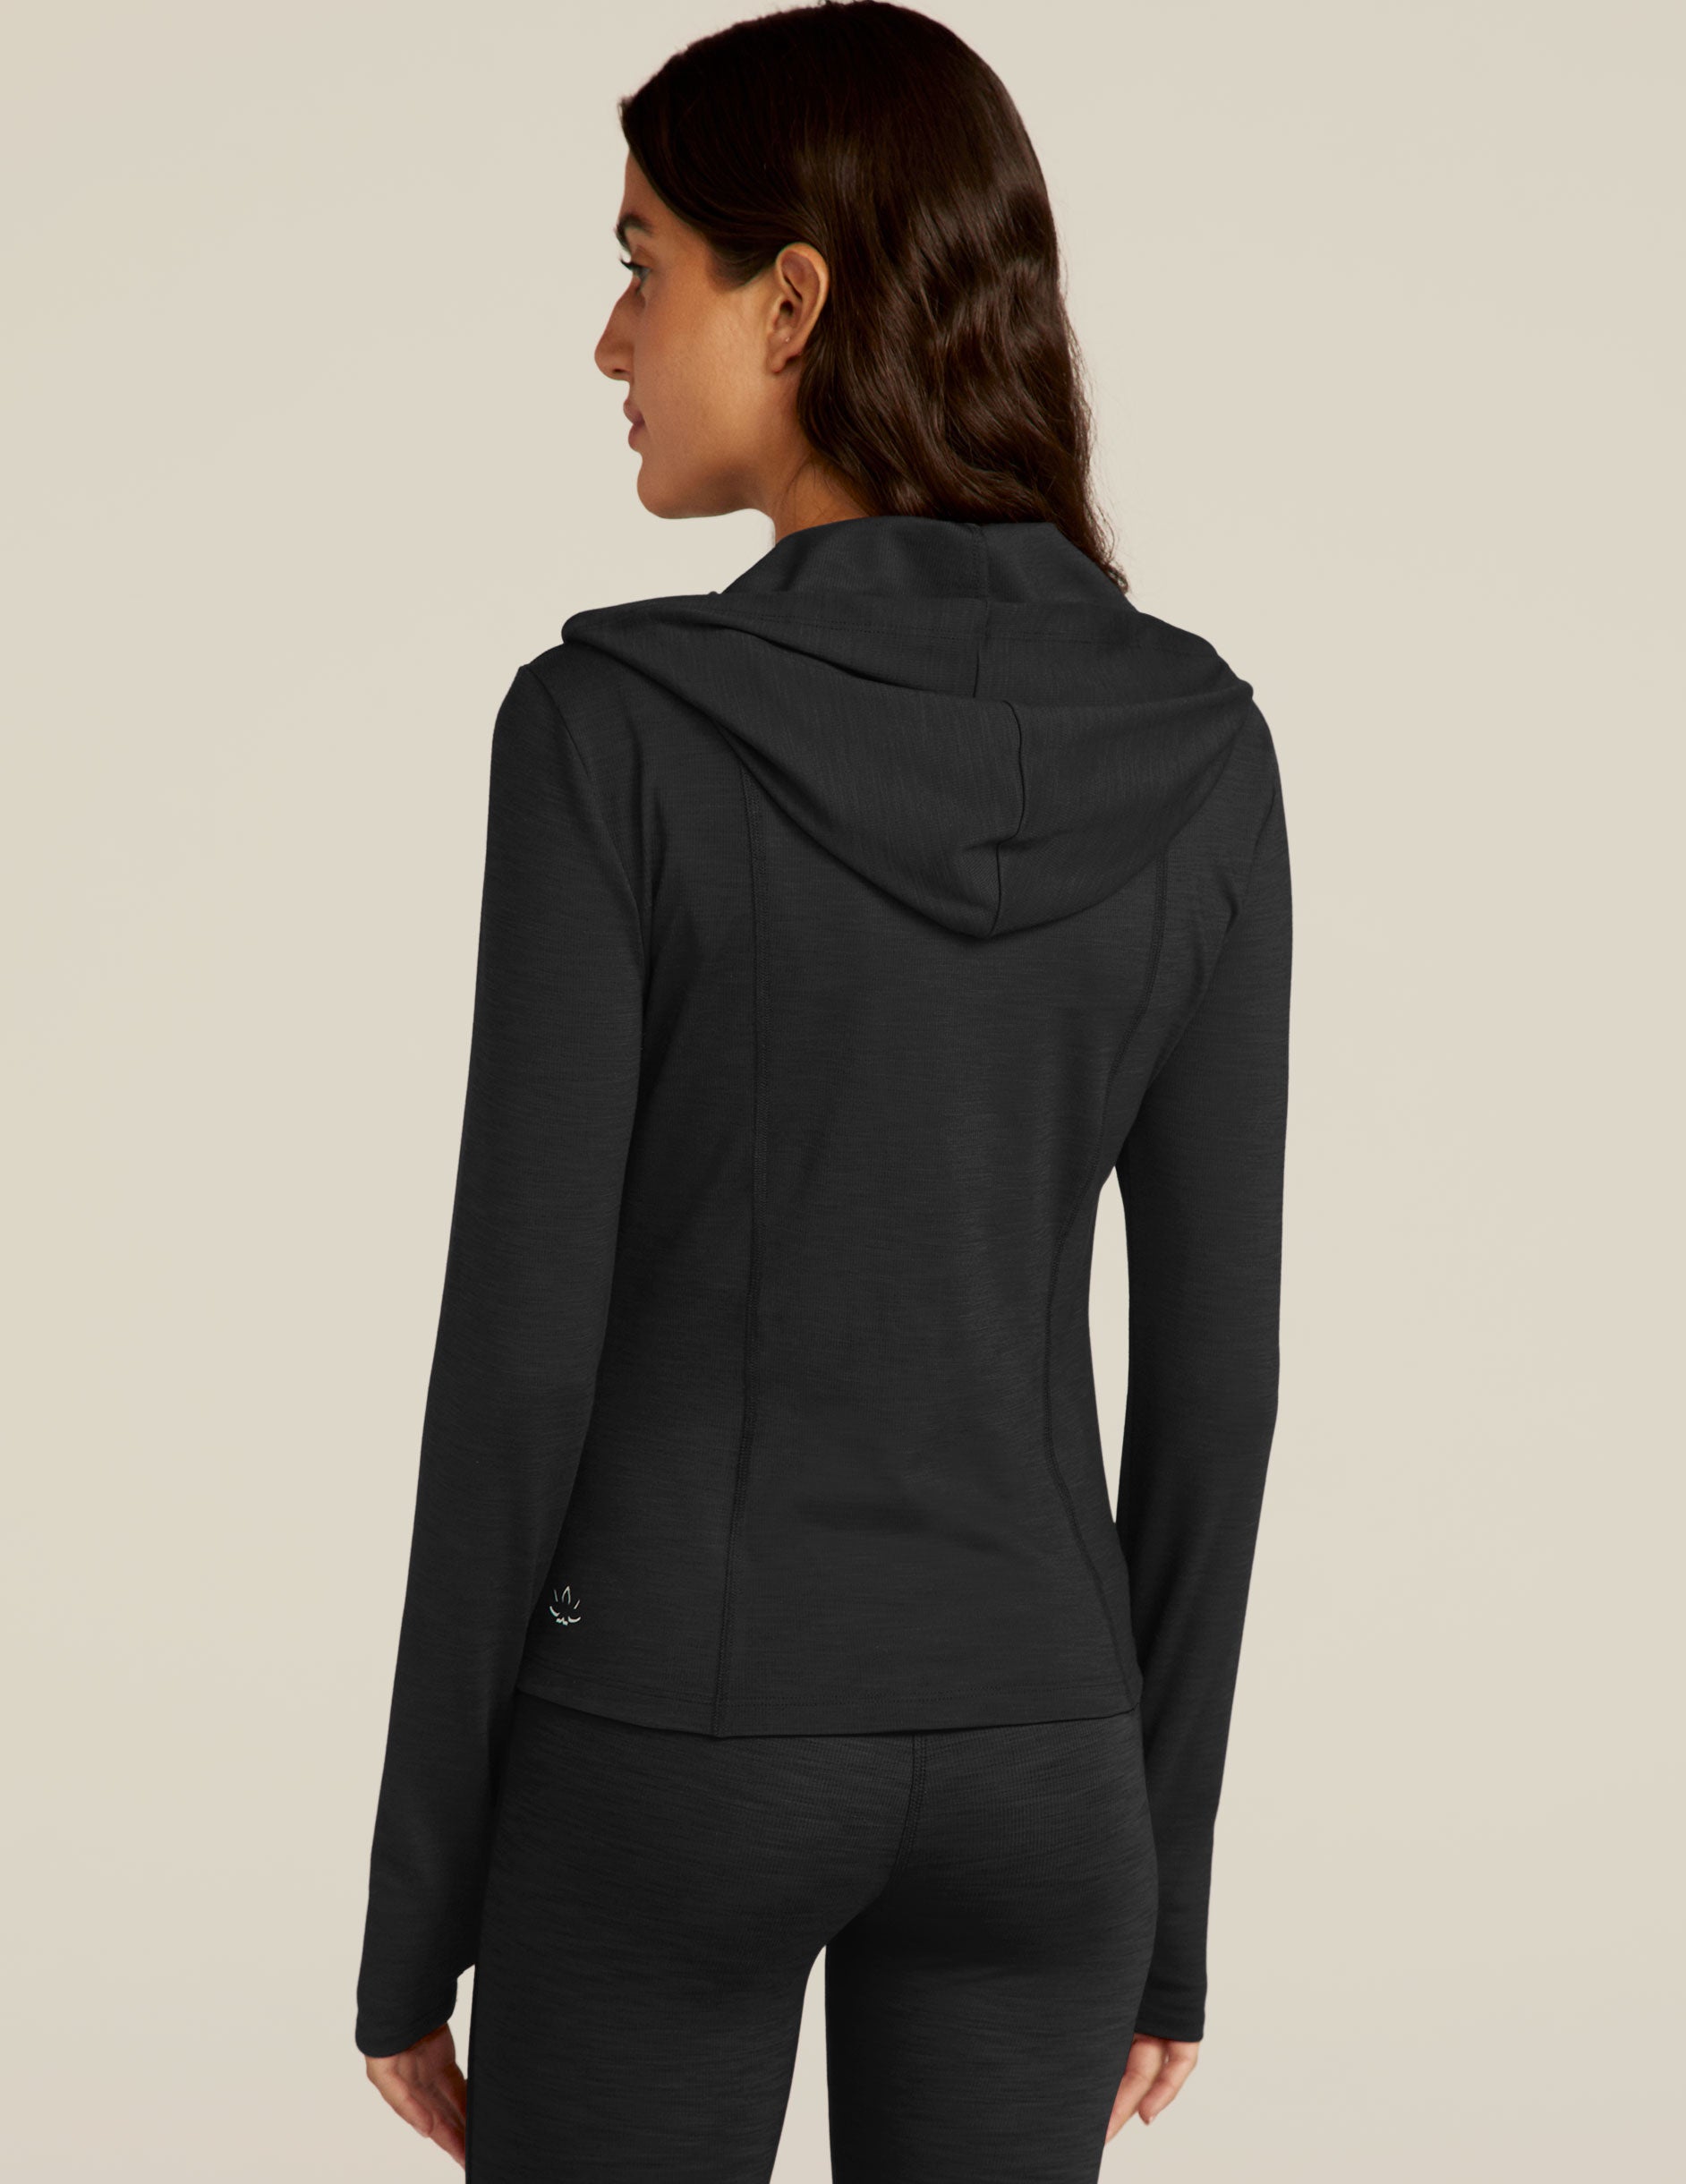 black zip-up jacket with a hoodie and thumb holes. 